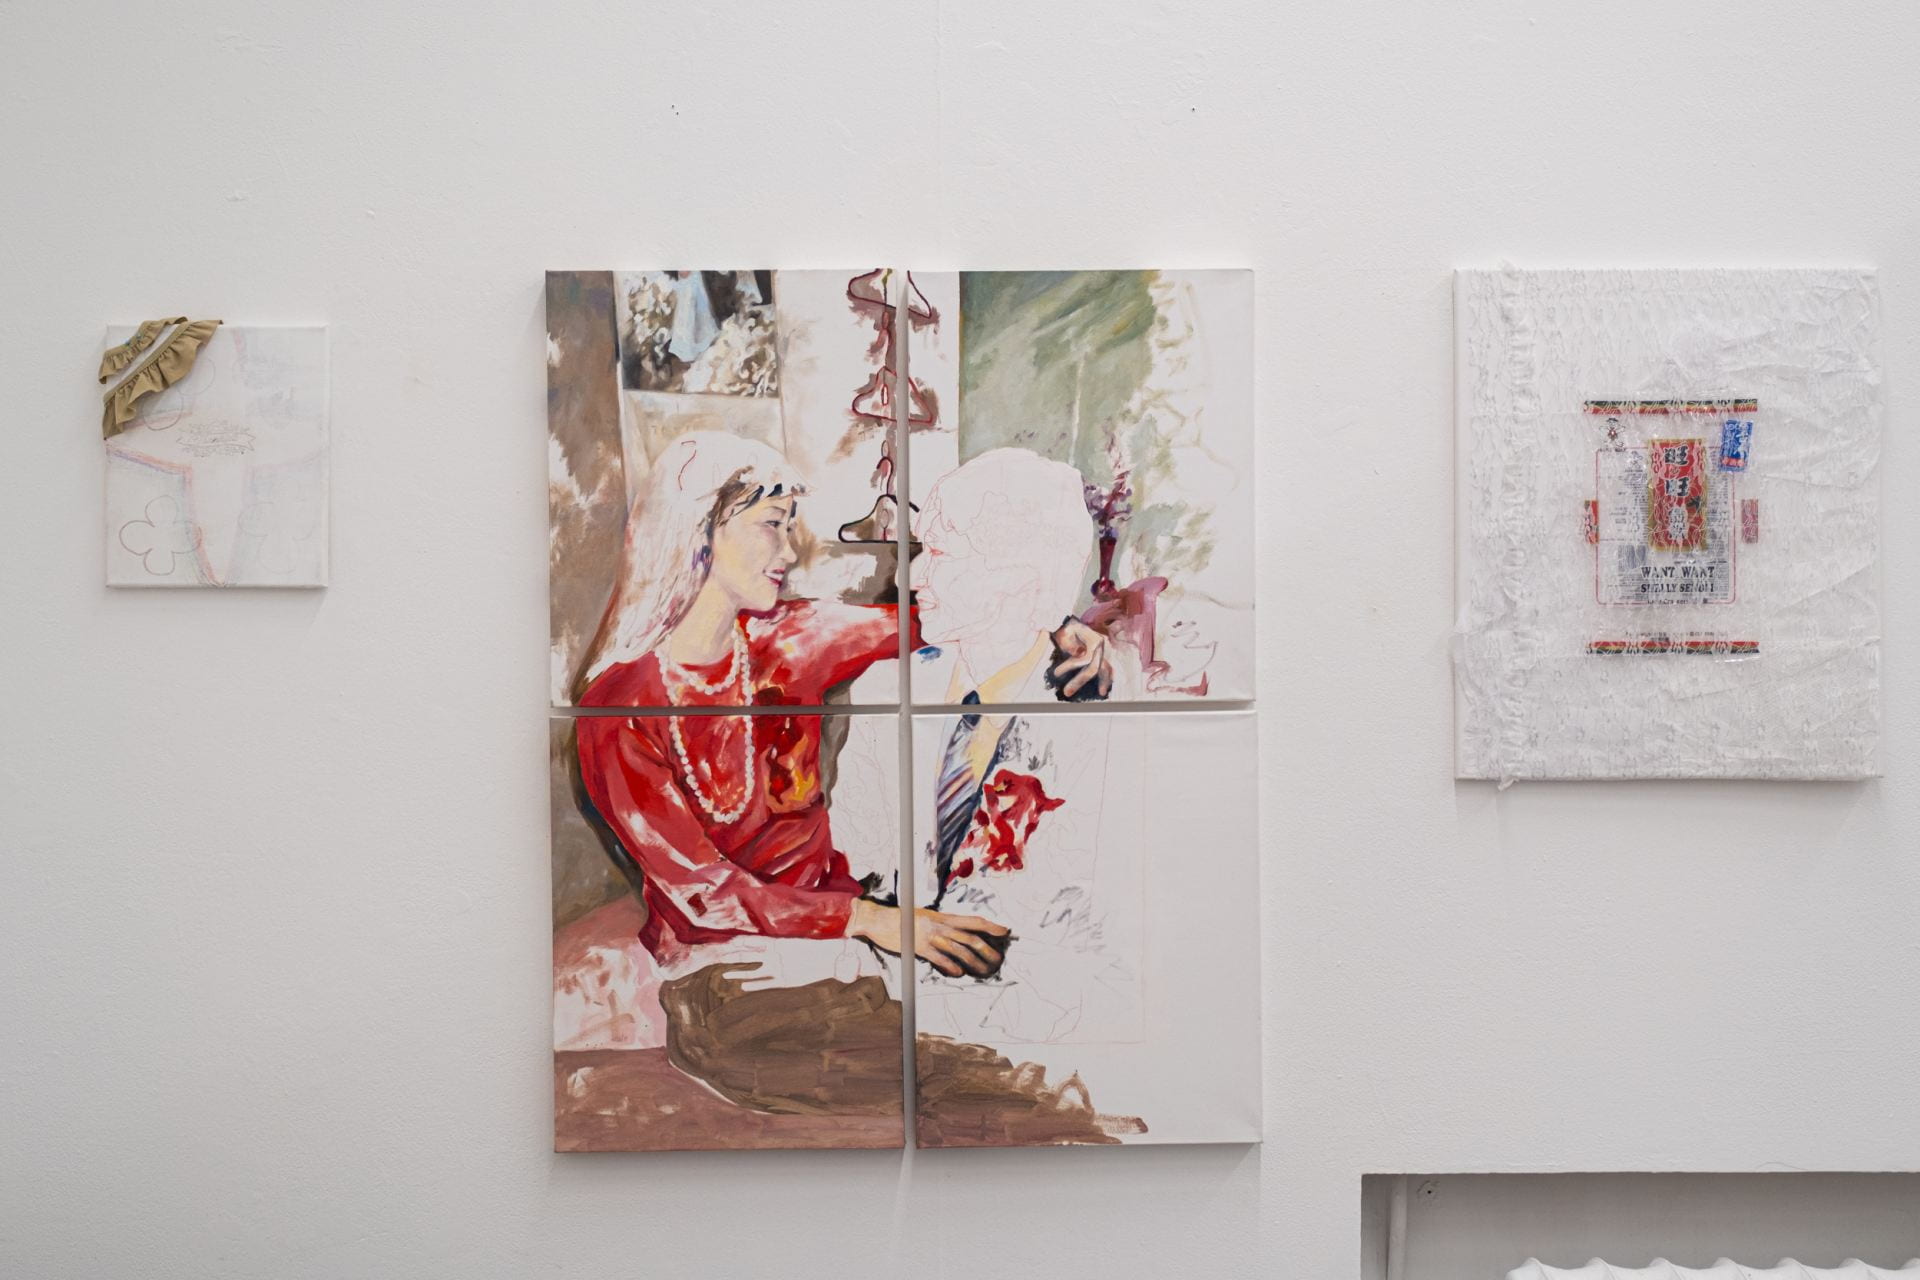 Installation view of three canvases horizontally installed on the wall. From left to right, there is a small painting with a "Thankful" sticker in the middle of the work. In the centre, there is a portrait oil painting of two figures, one of the figures has been left intentionally blank. On the right, there is a lace wrapped medium sized canvas with a chinese snack encased in the centre.